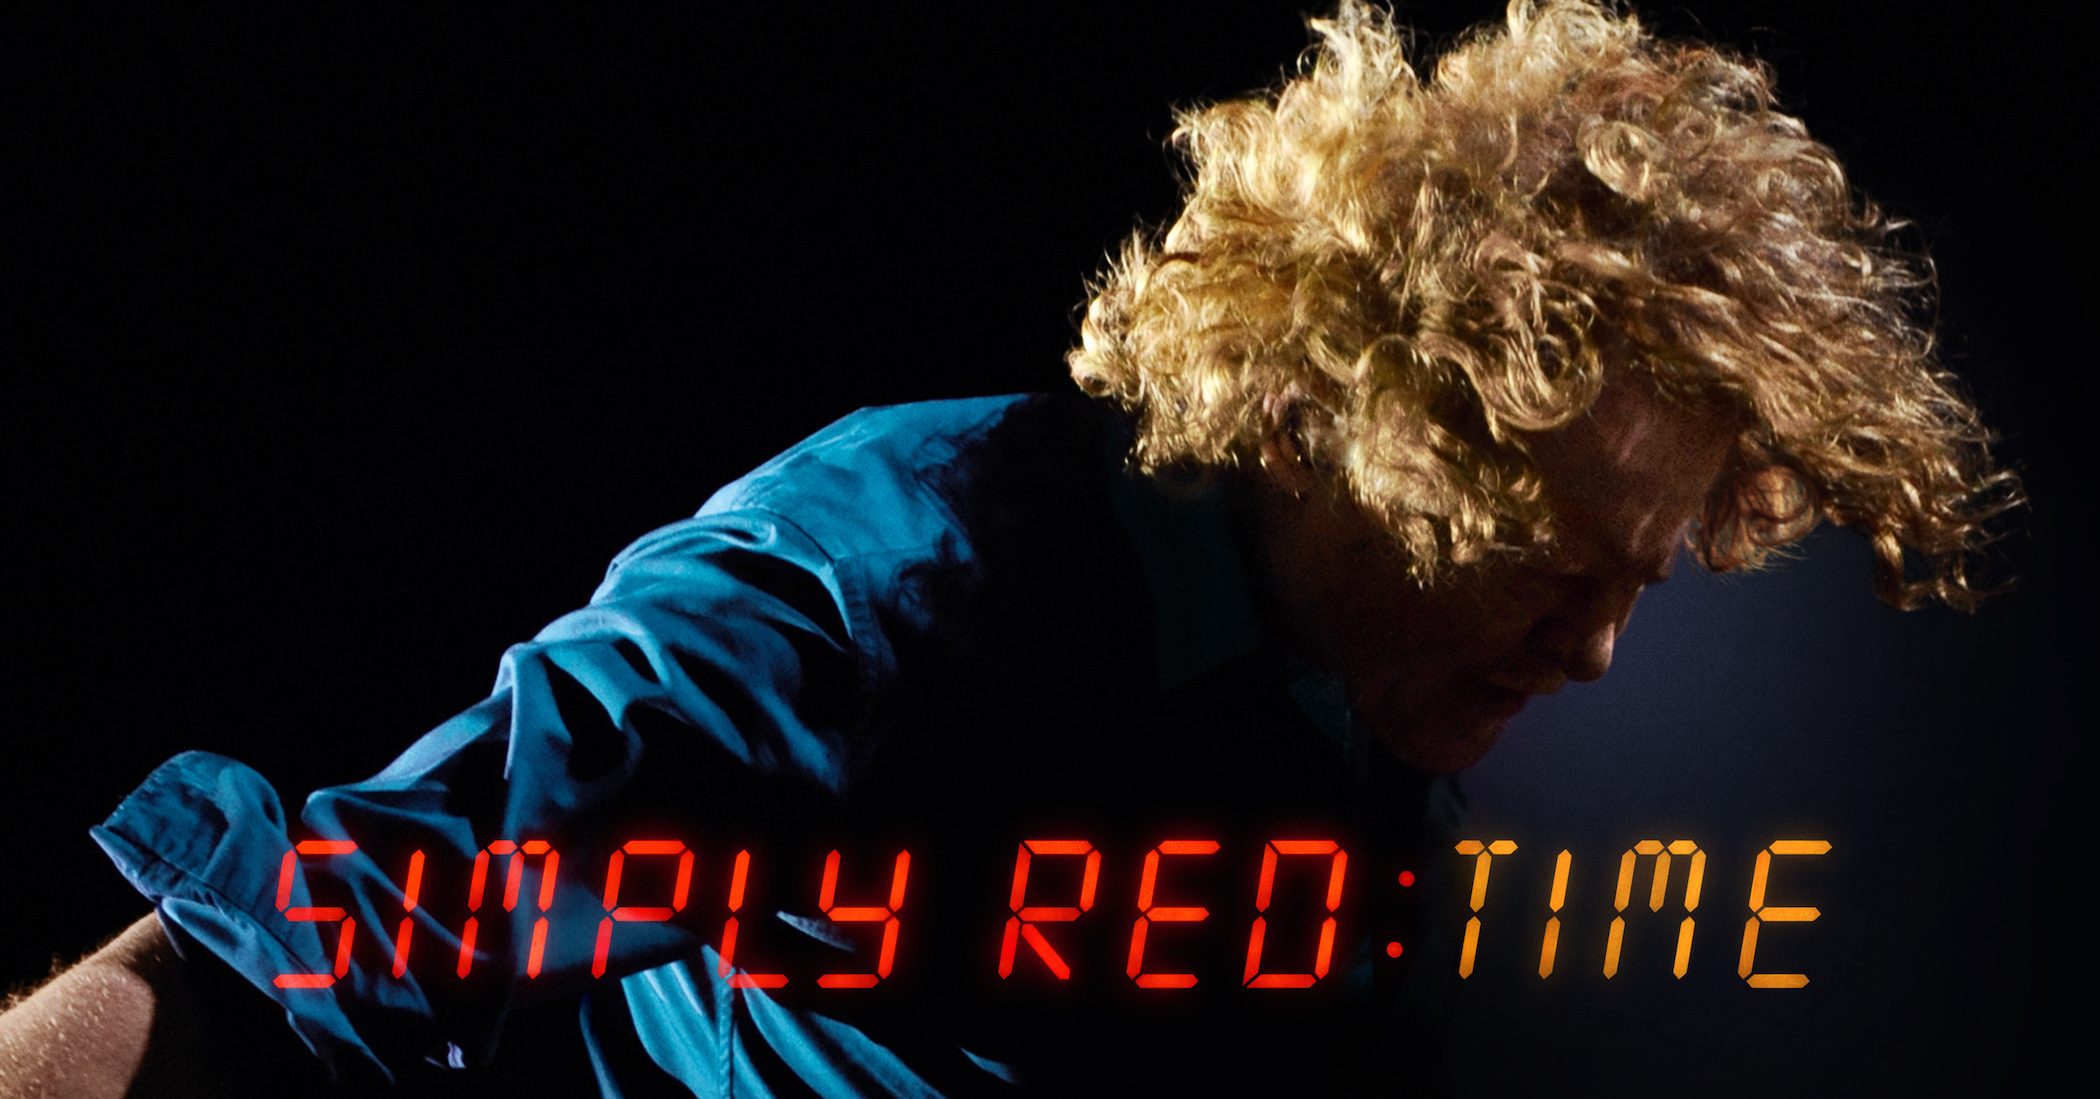 Simply Red to Release Anticipated Album “Time”